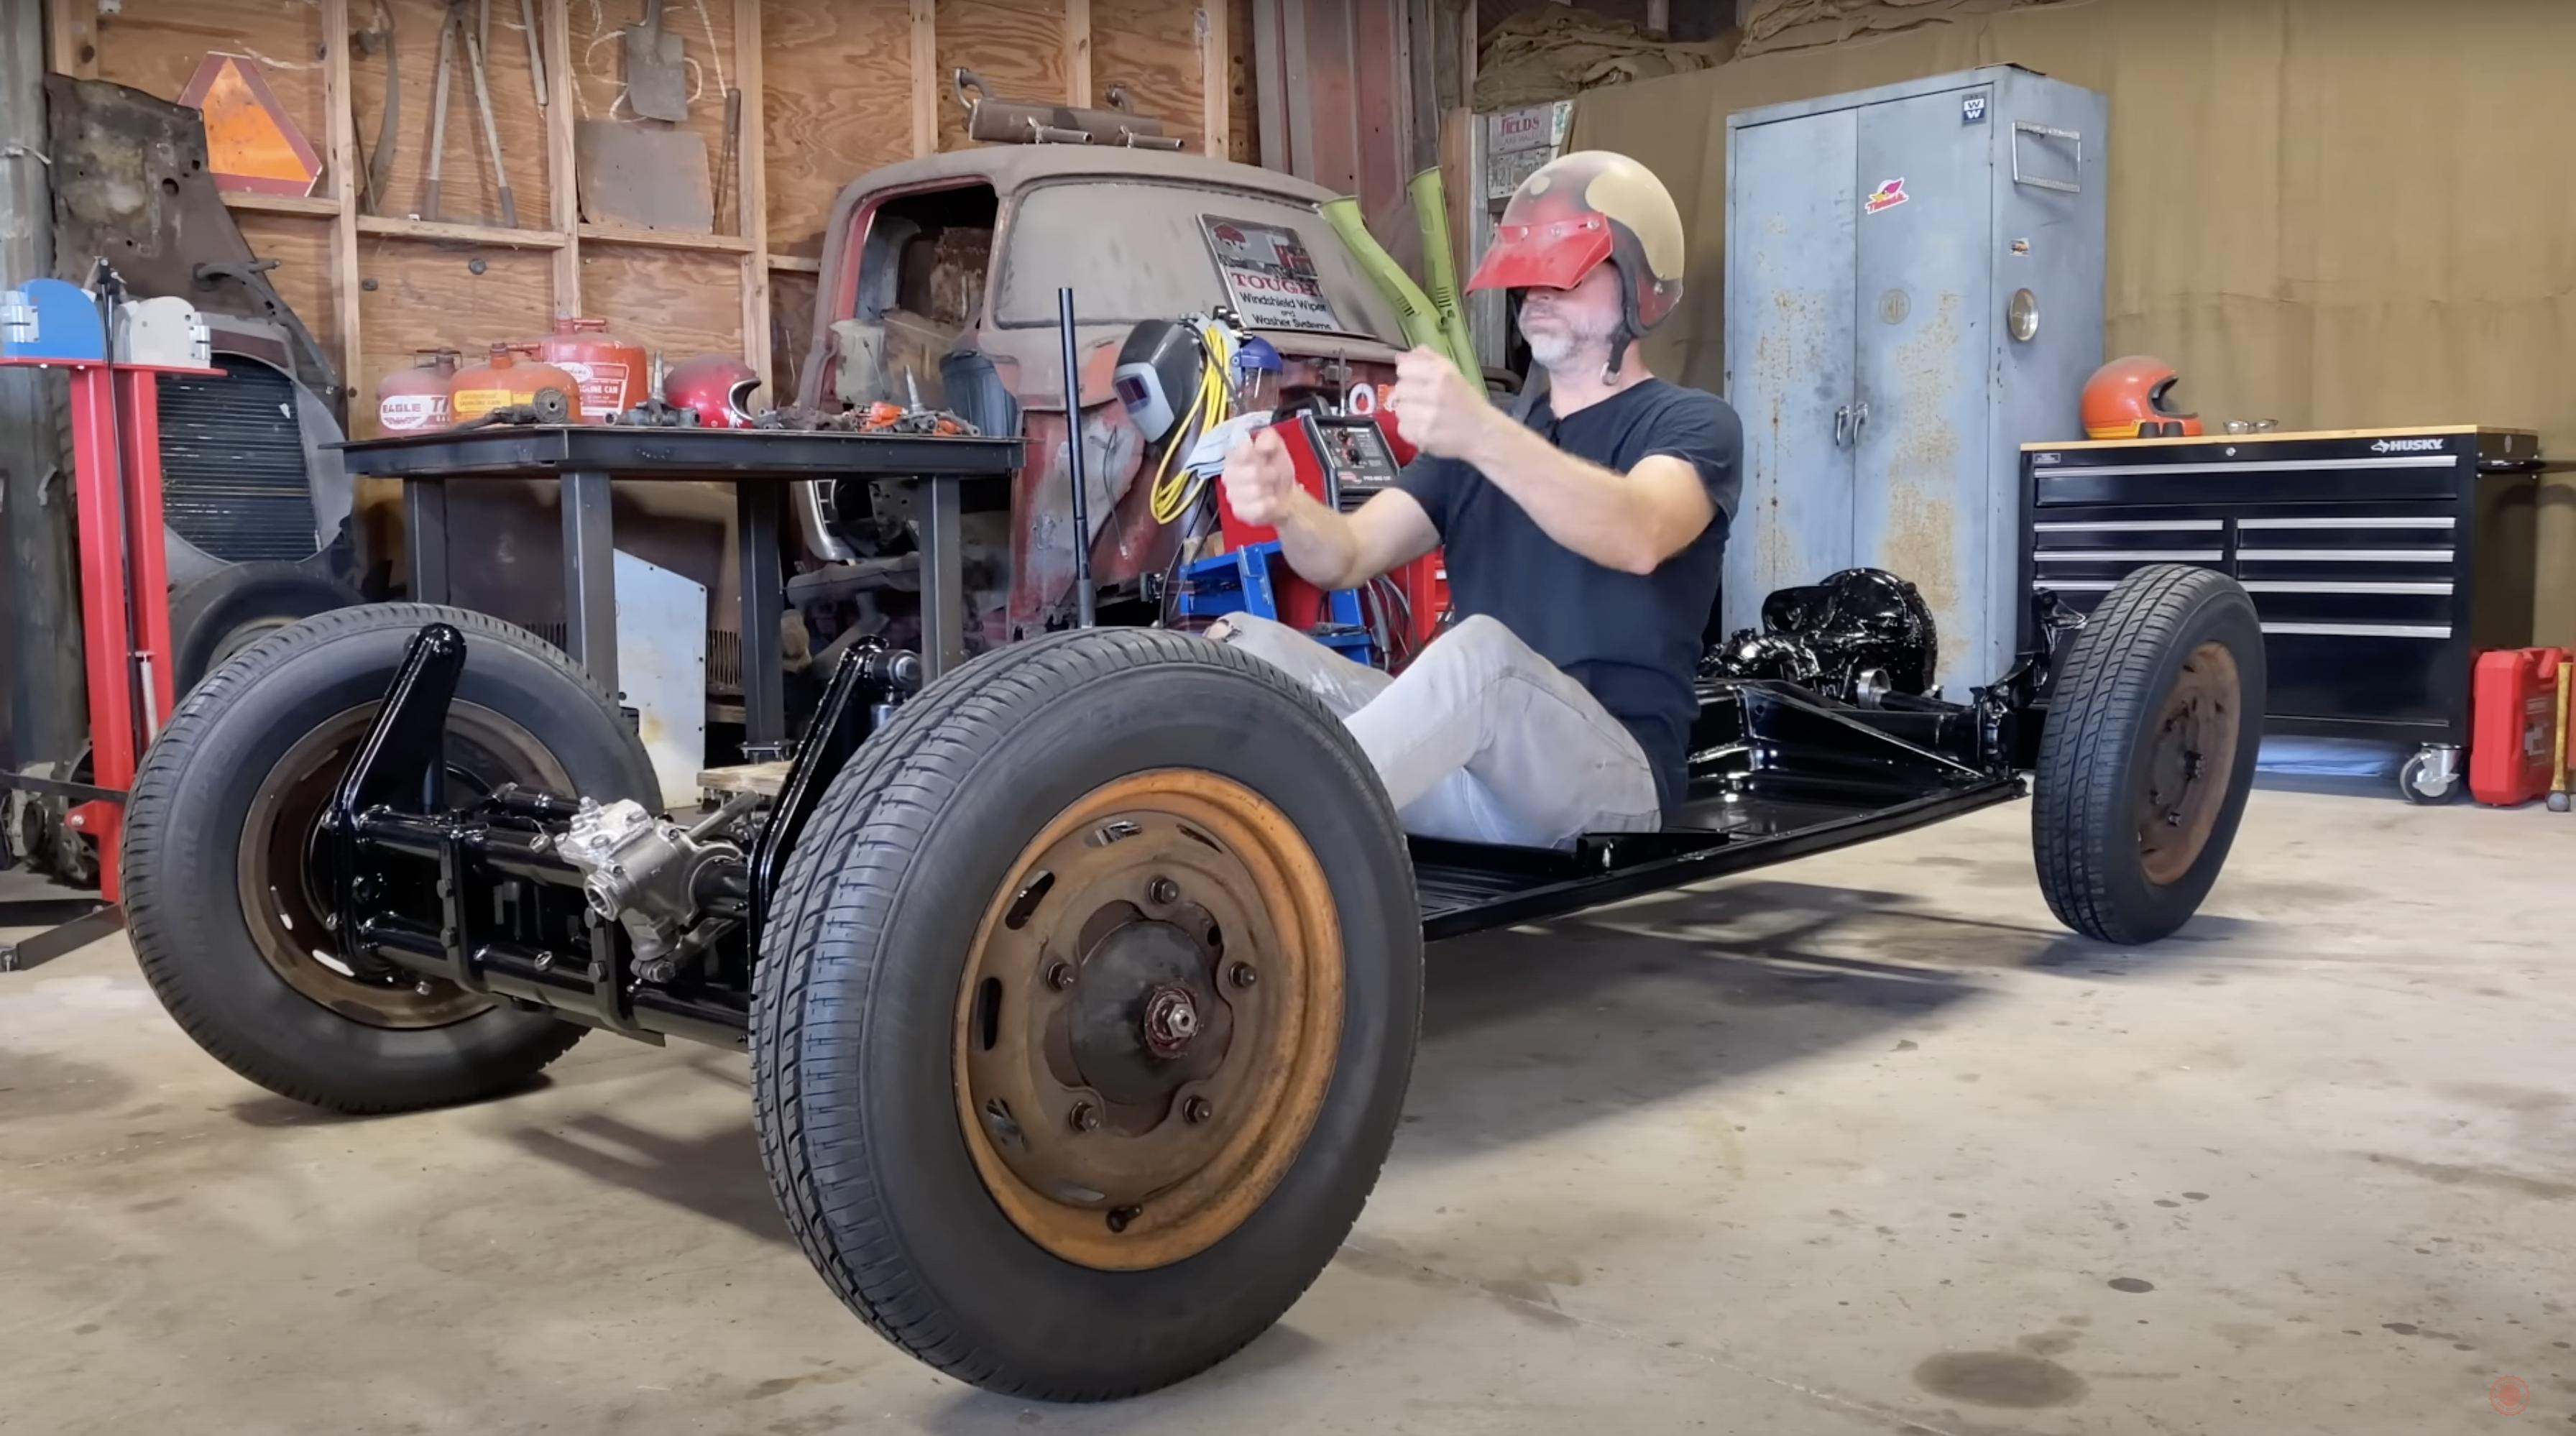 What does it take to fully restore a 1965 Volkswagen Beetle? Follow along on one man's journey